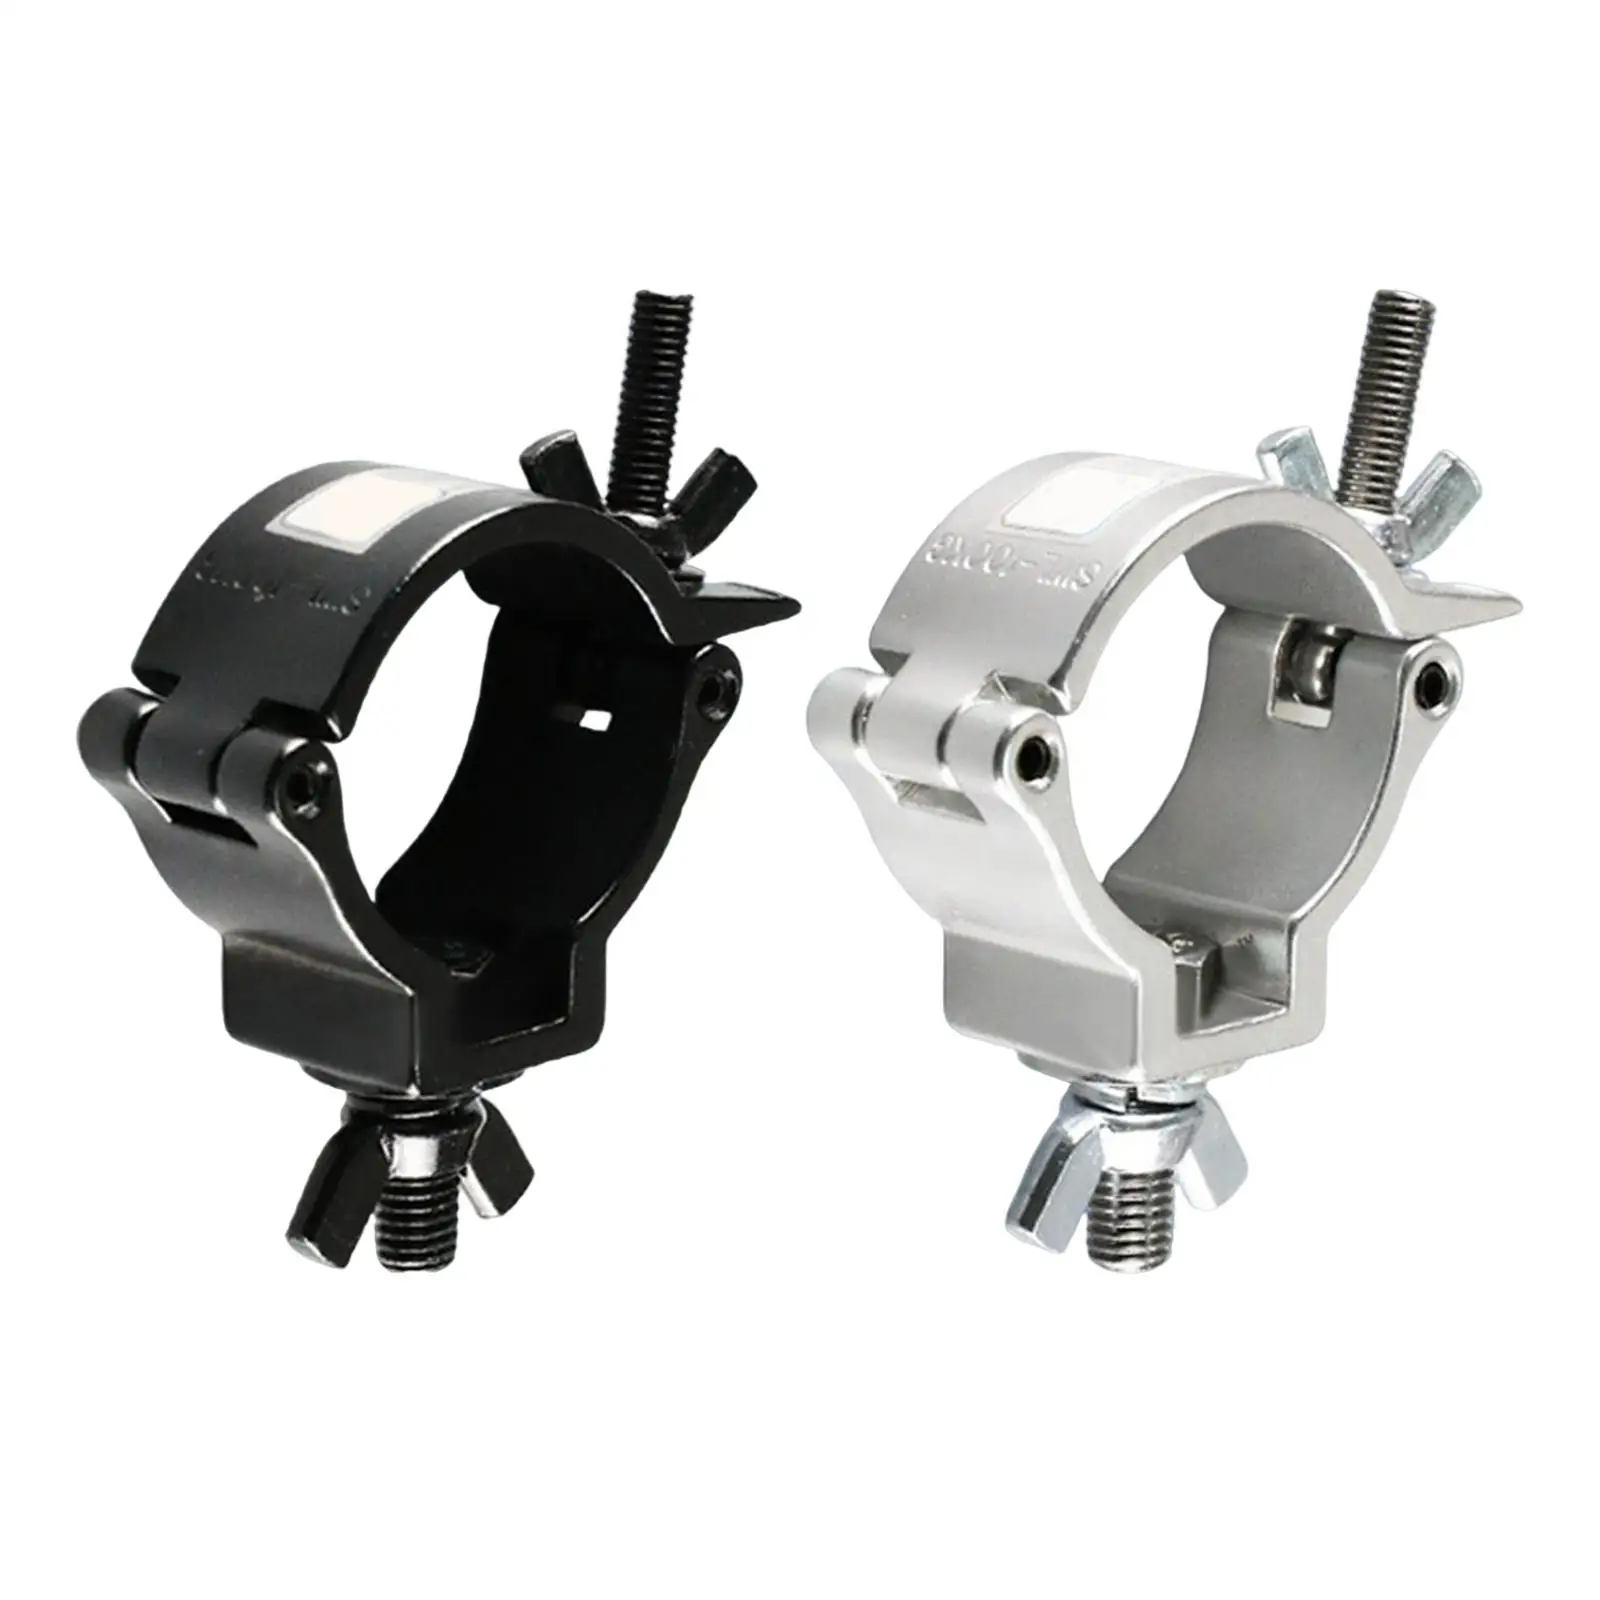 Heavy Duty Stage Lighting Mount Clamp Aluminum Alloy for Moving Head Light